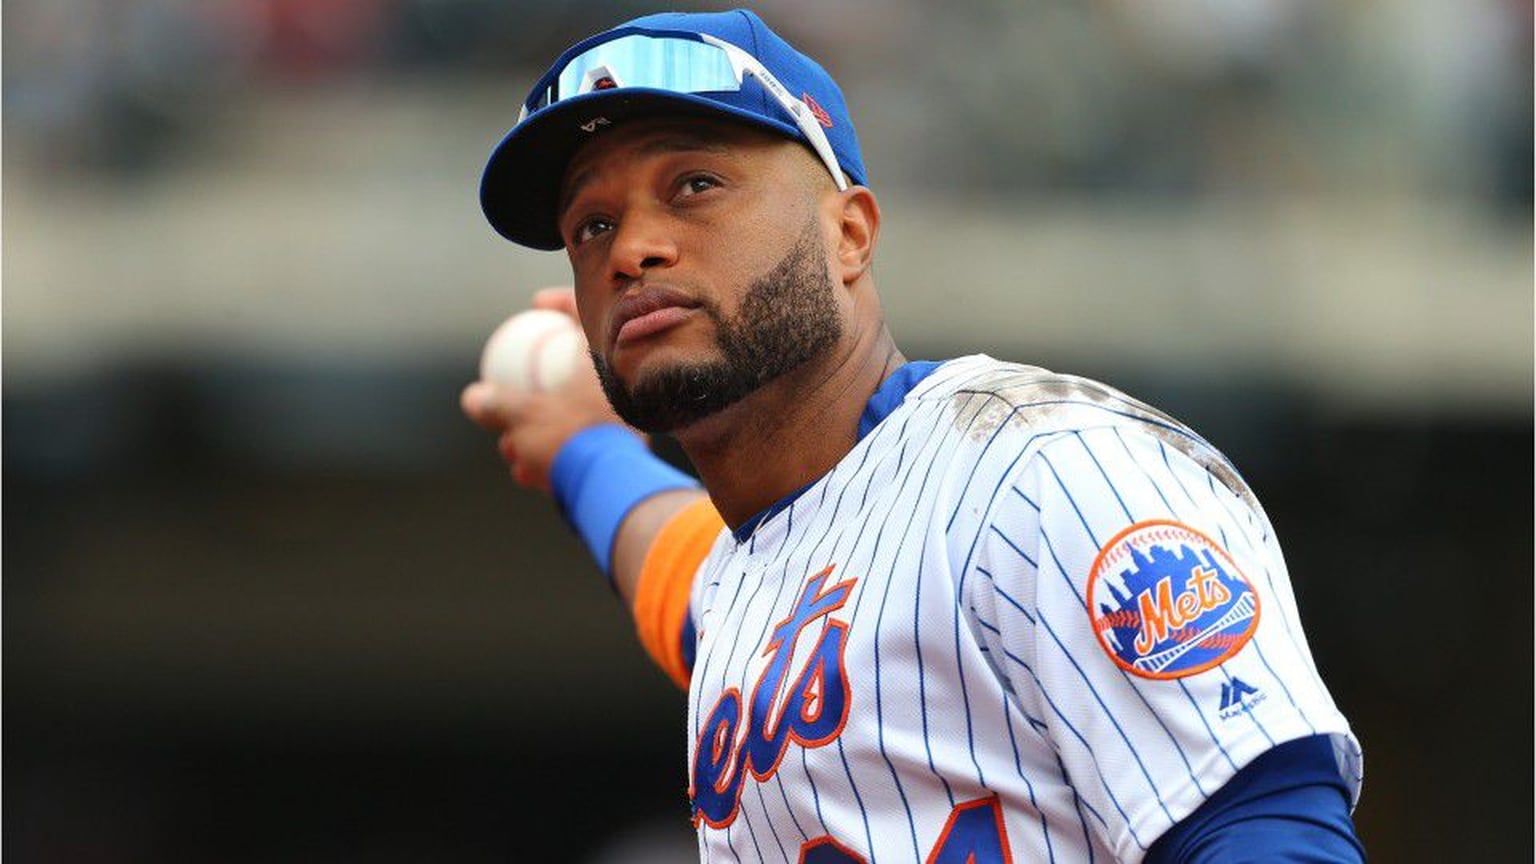 Robinson Cano Suspended 80 Games for Positive Drug Test - The New